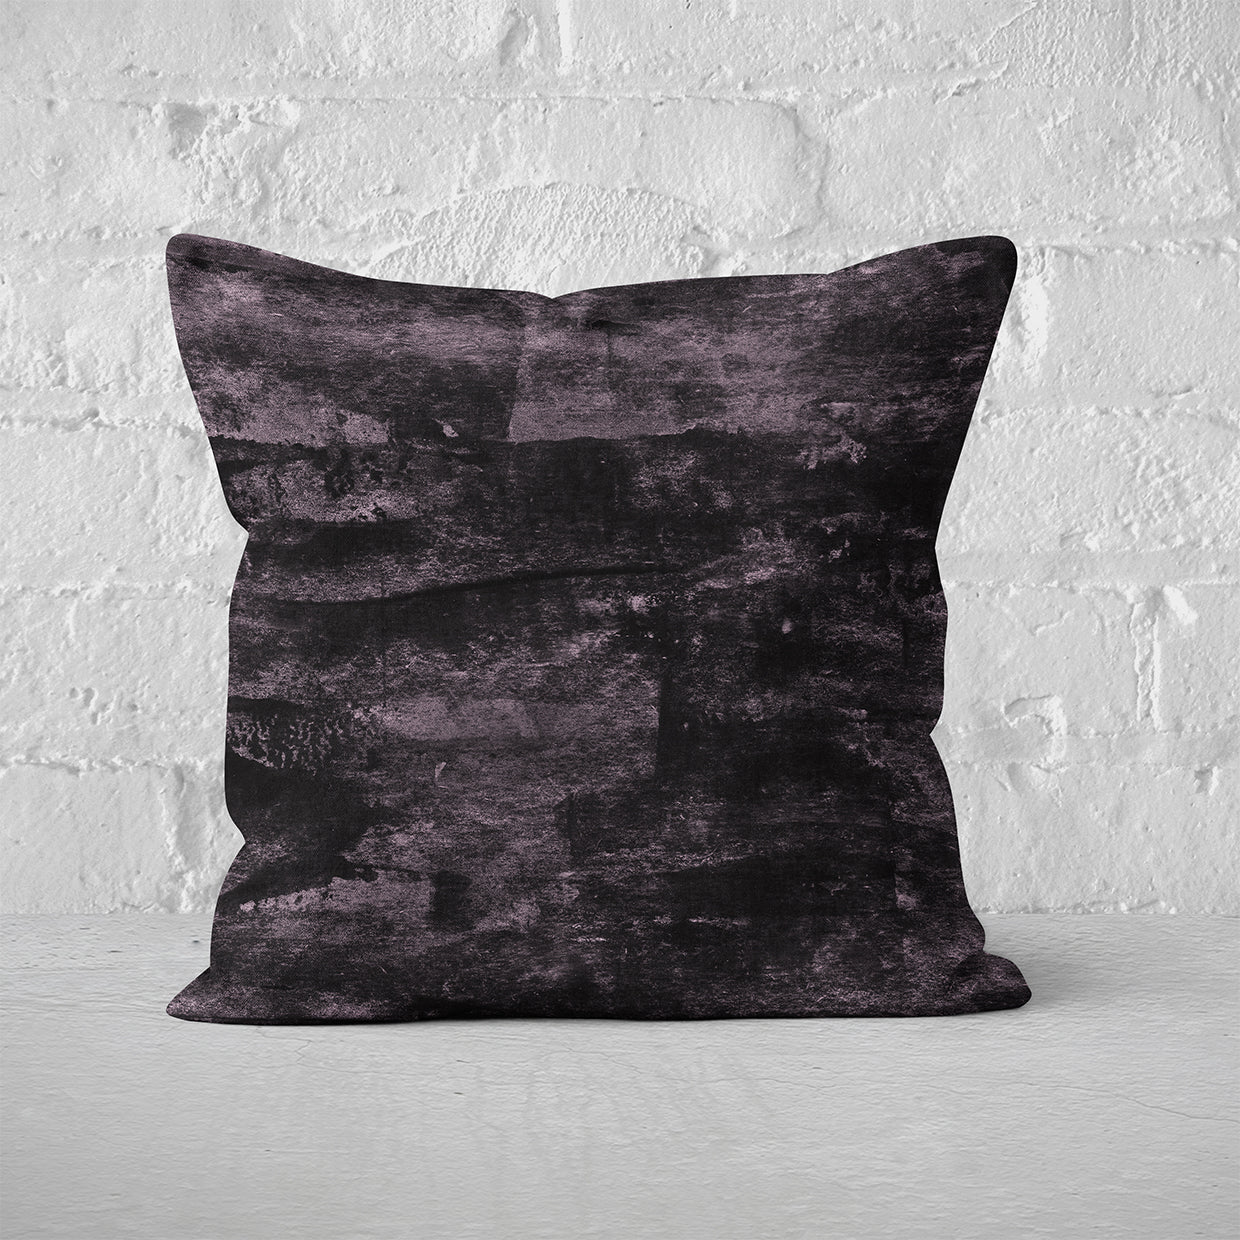 Pillow Cover Art Feature 'Satellite' - Black & Light Pink - Cotton Twill